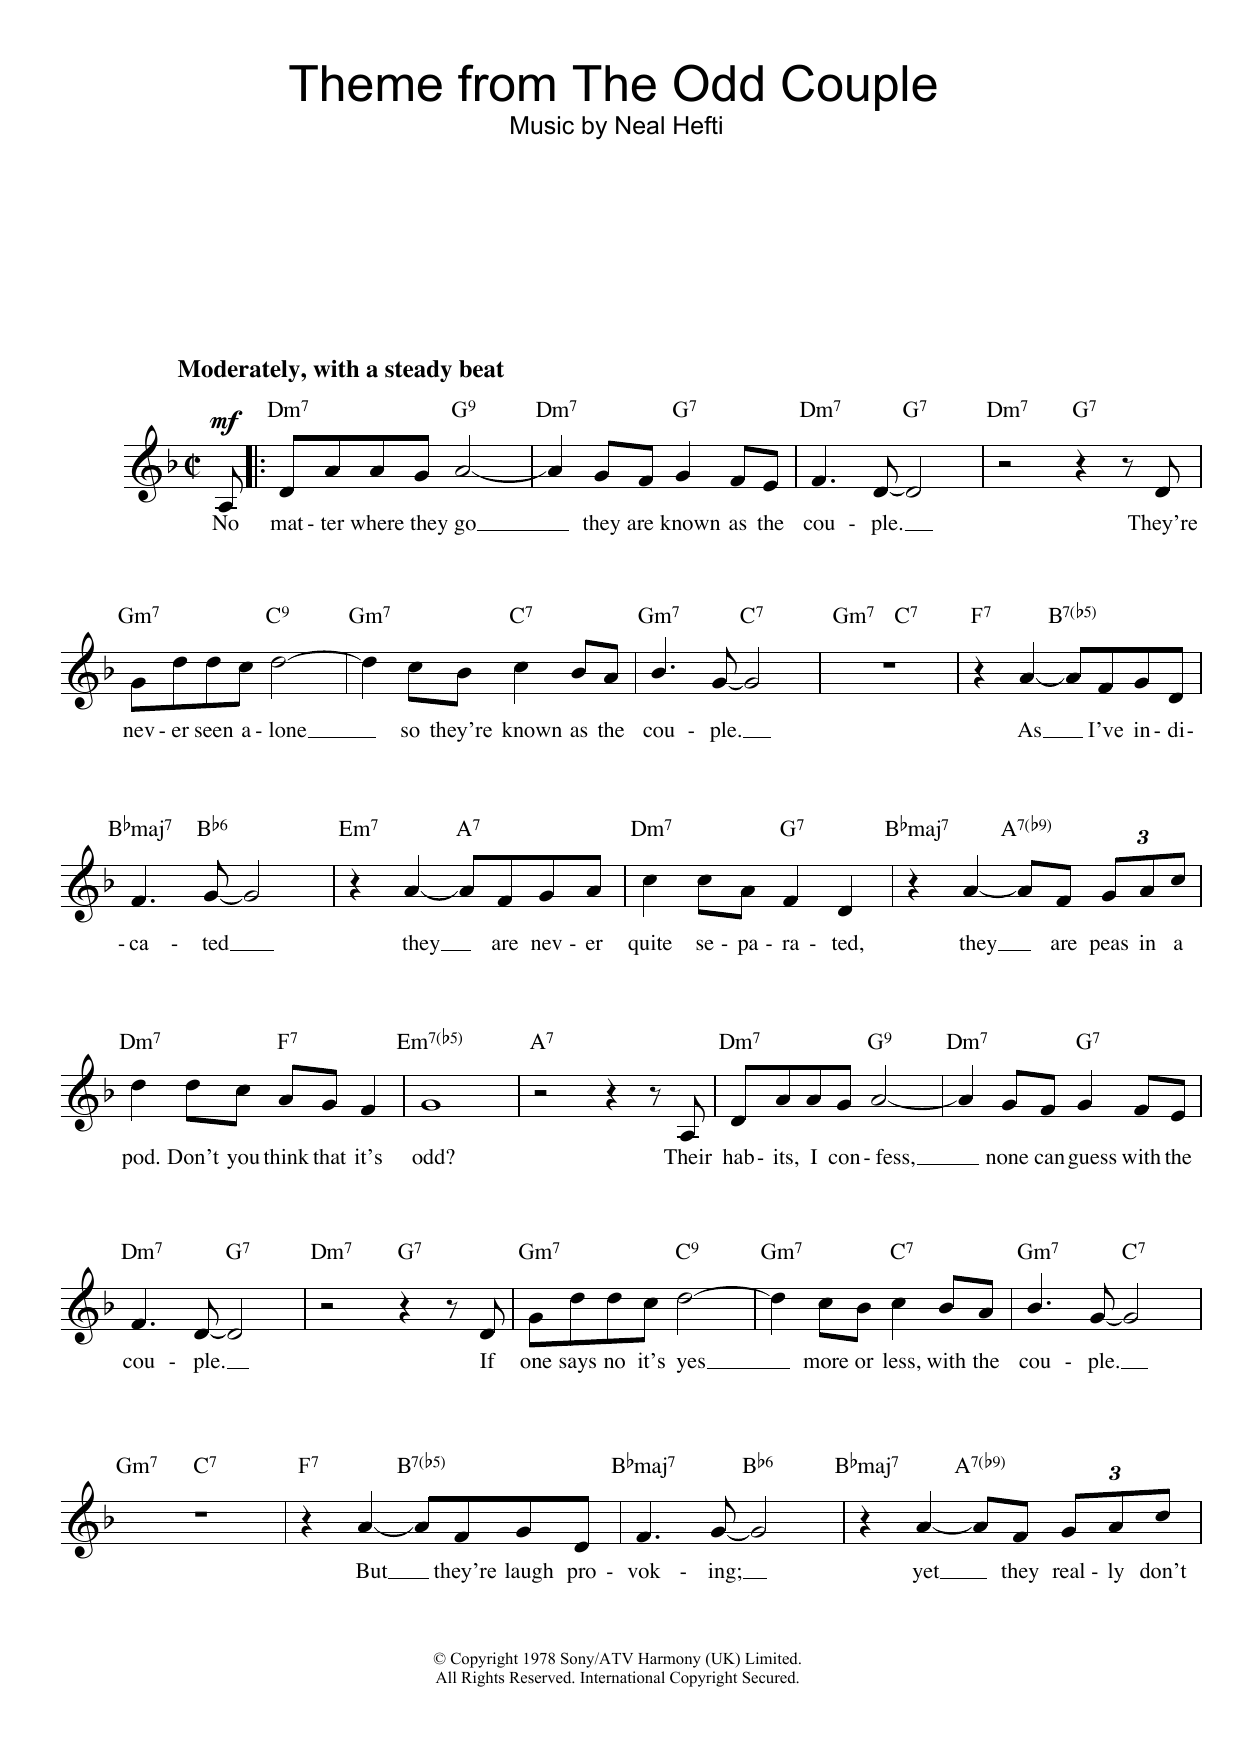 Neal Hefti Theme from The Odd Couple sheet music notes and chords. Download Printable PDF.